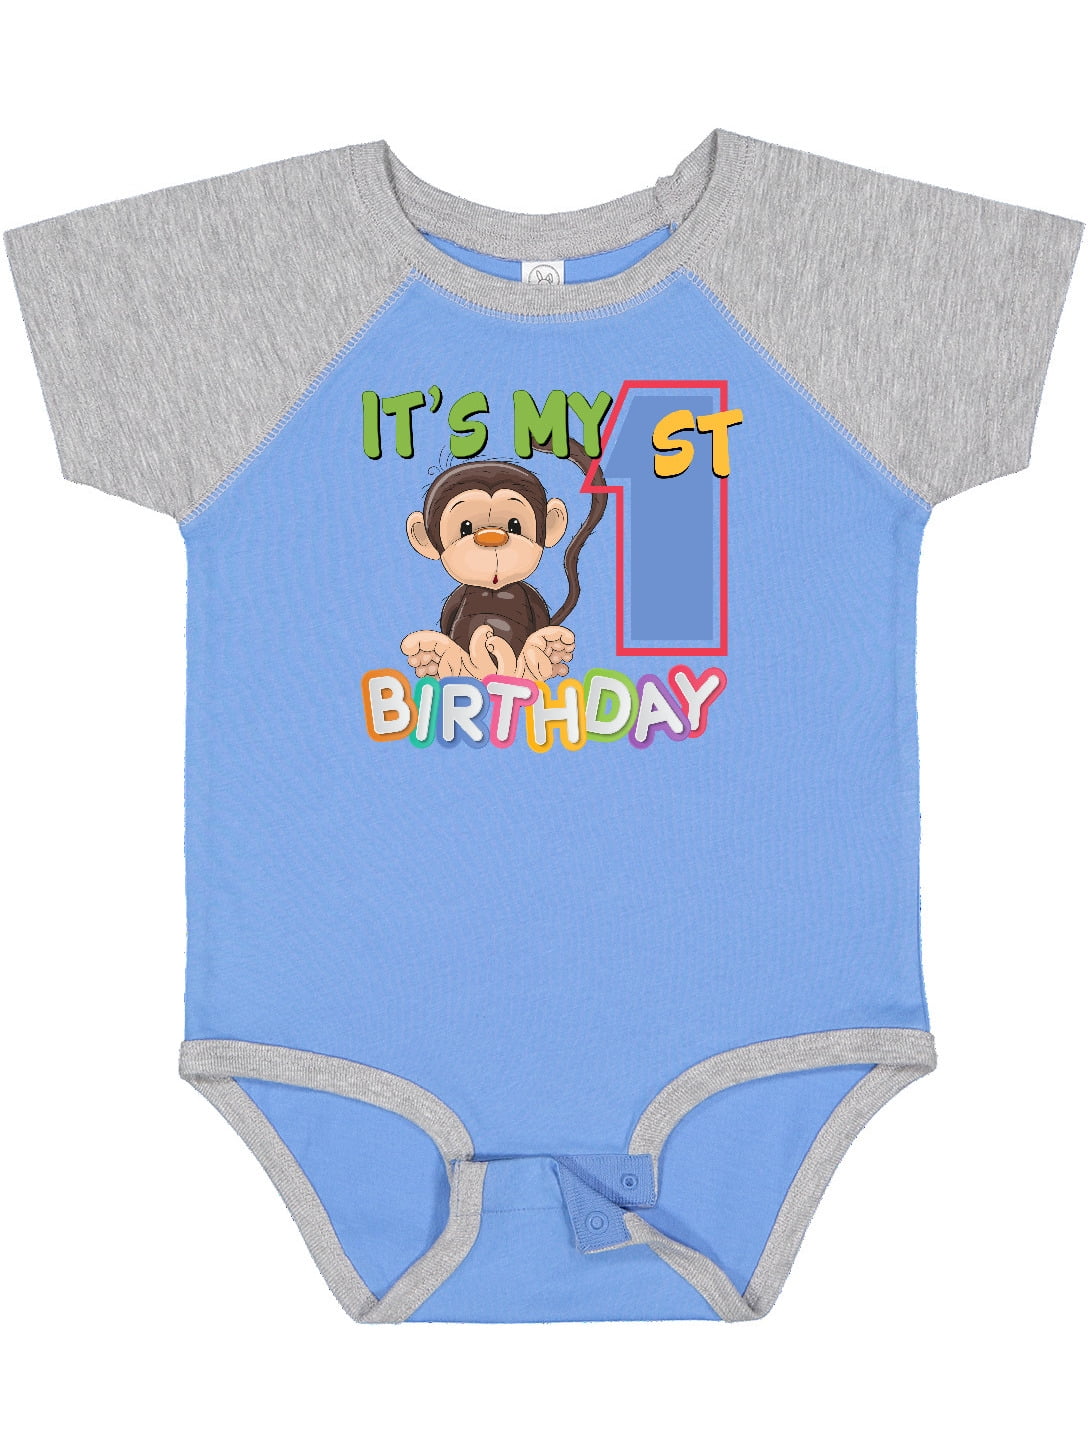 Carter’s $12 Hooray It’s My 1st Birthday 18m First Bday Bodysuit Girls Outfit 